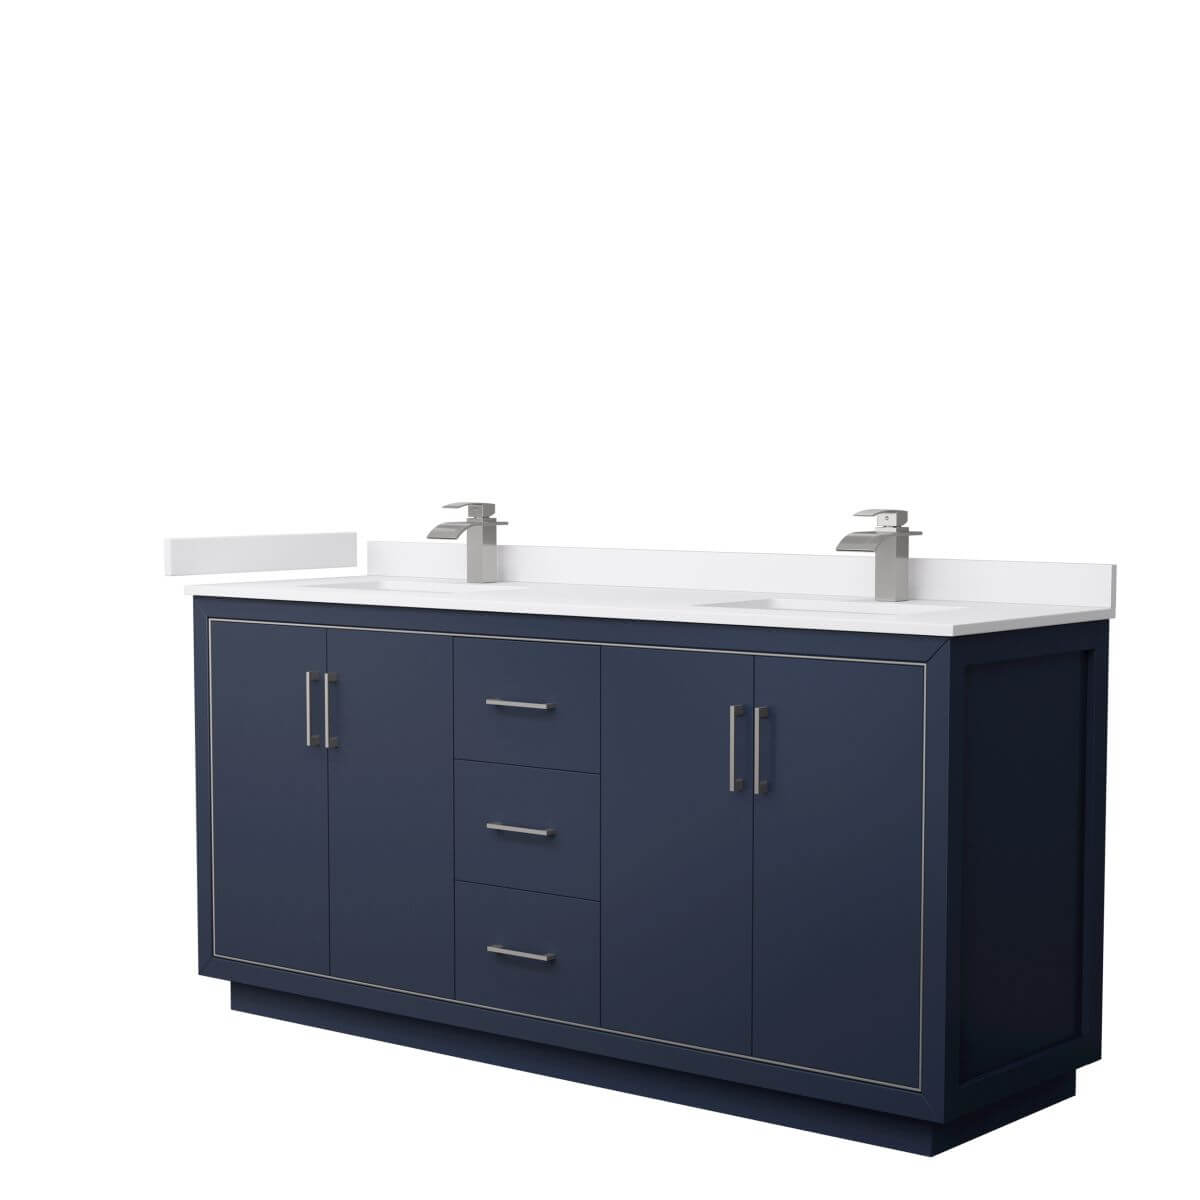 Wyndham Collection WCF111172DBNWCUNSMXX Icon 72 inch Double Bathroom Vanity in Dark Blue with White Cultured Marble Countertop, Undermount Square Sinks and Brushed Nickel Trim